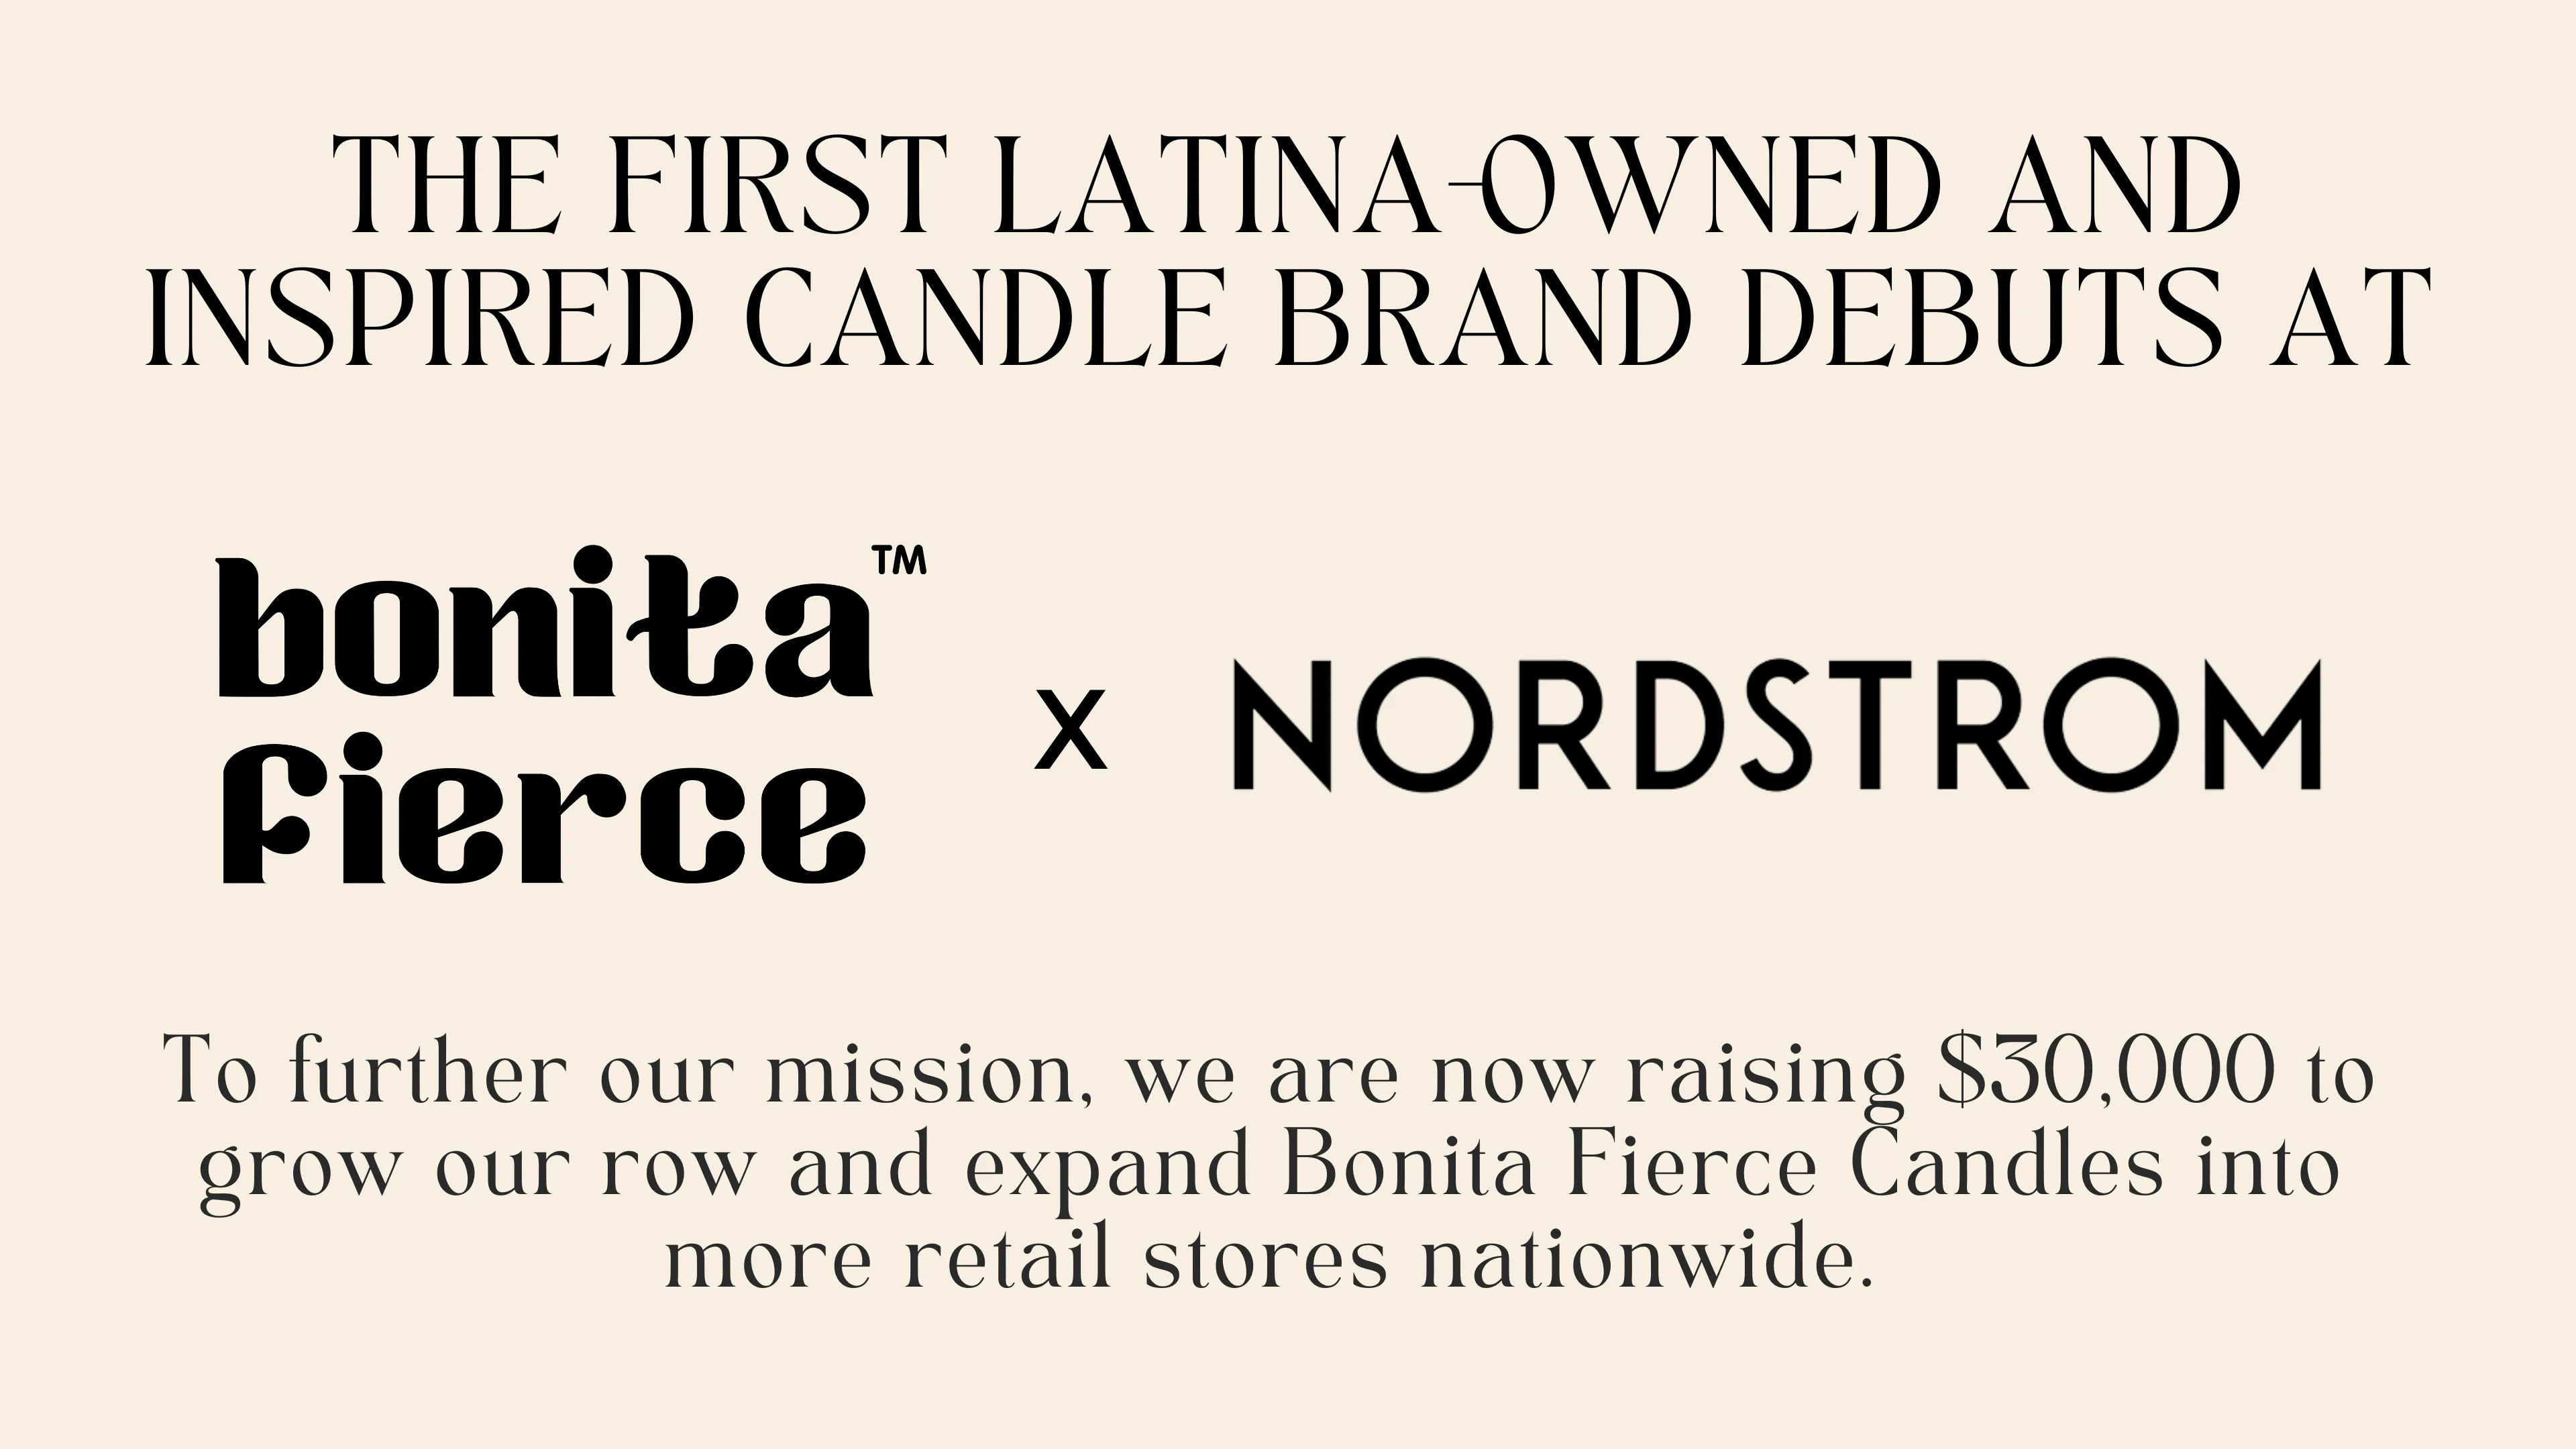 The first Latina-owned and Inspired Candle Brand Debuts at Nordstrom